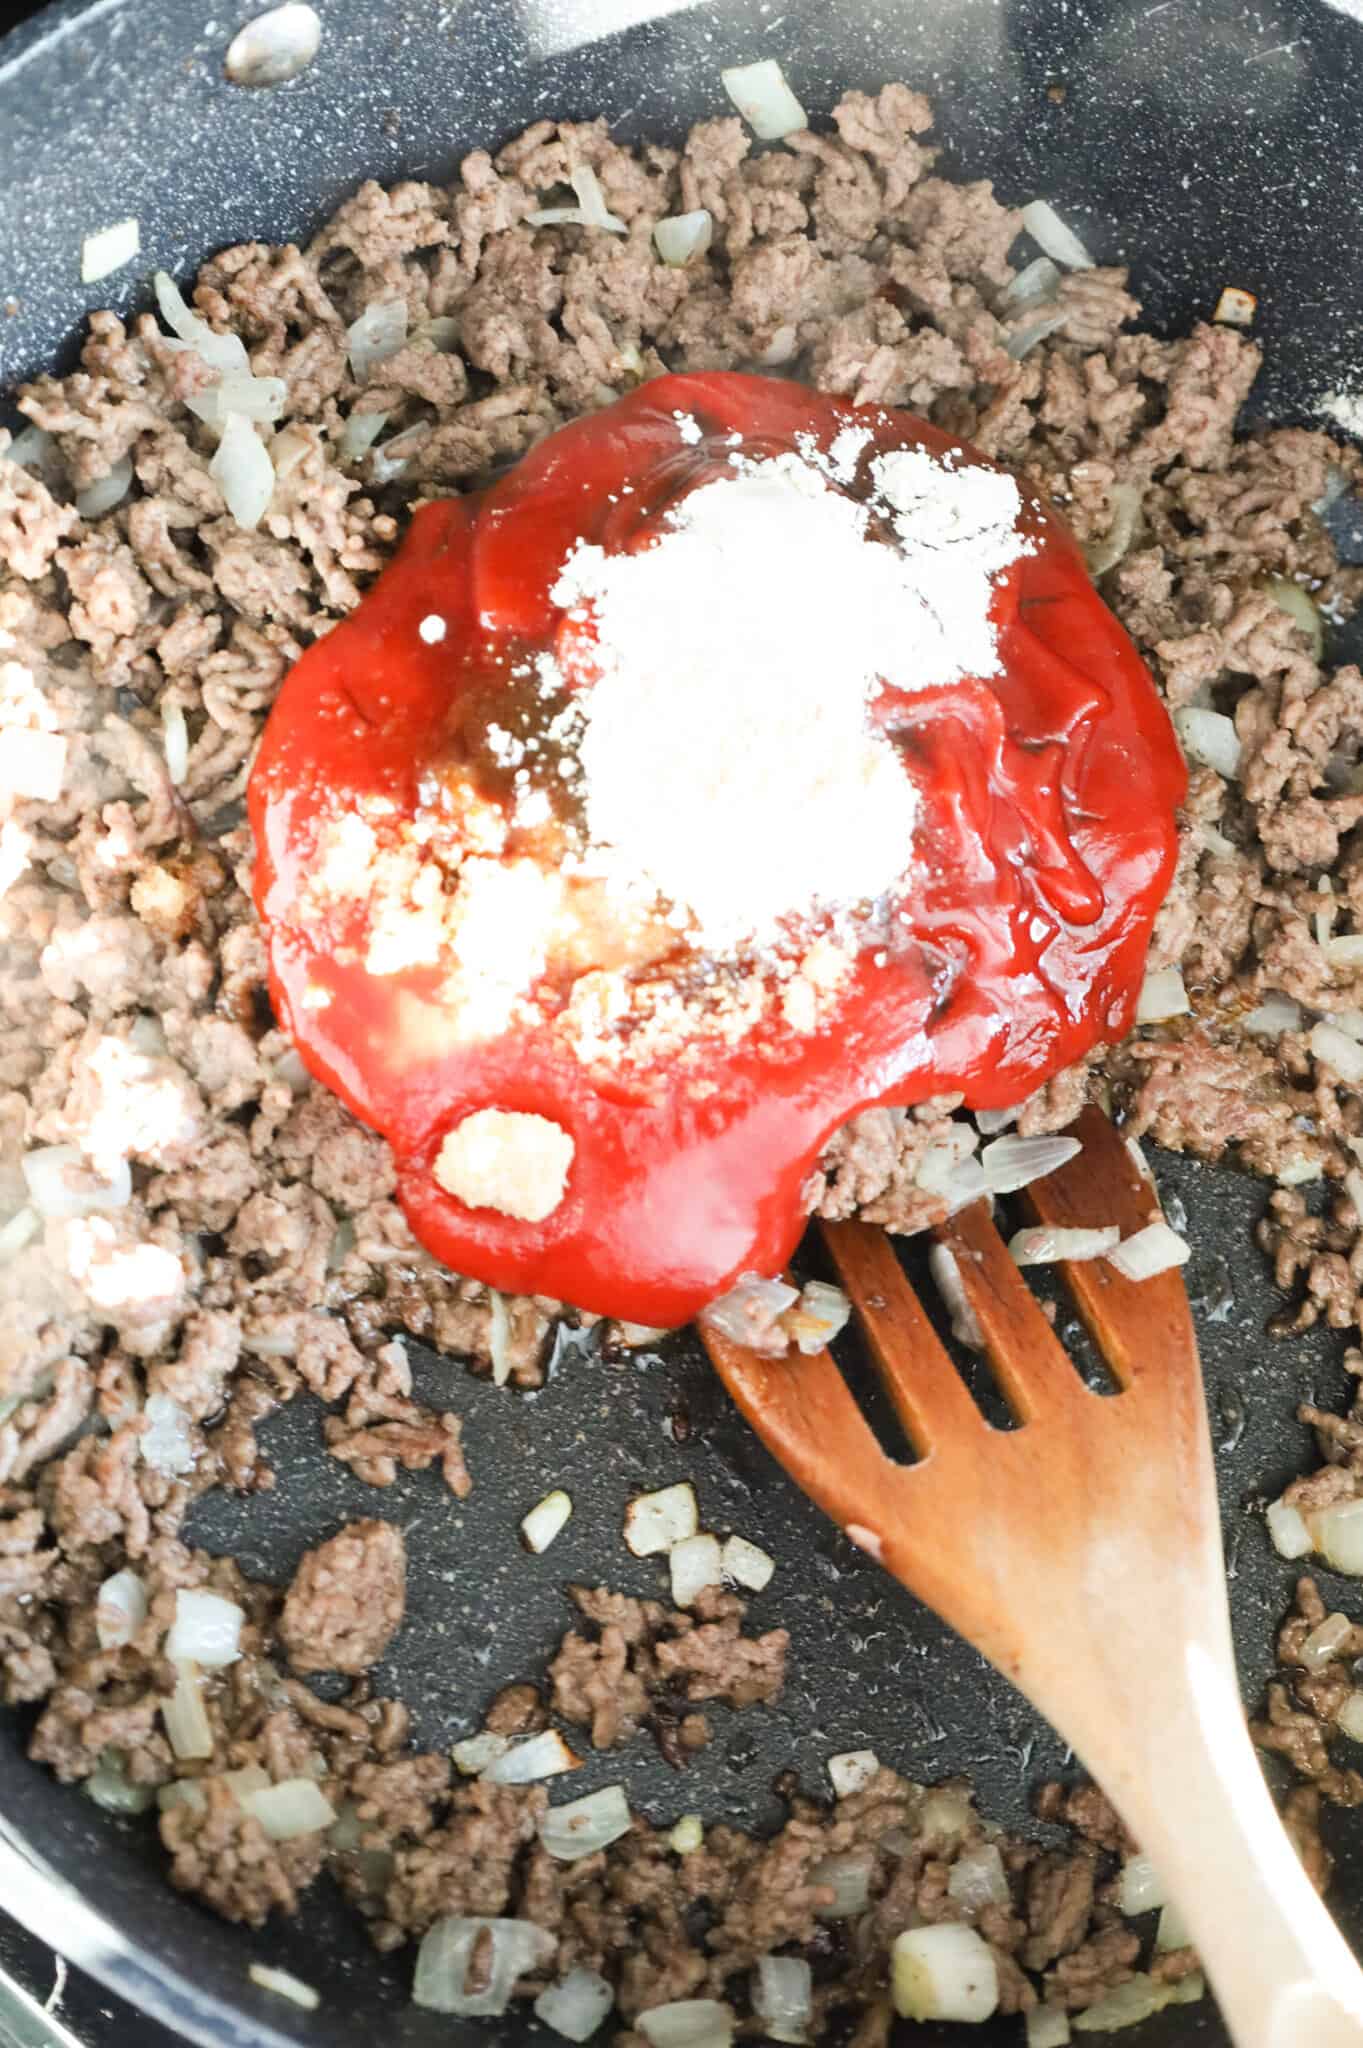 onion powder, garlic powder, brown sugar, Worcestershire sauce and ketchup on top of ground beef in a skillet